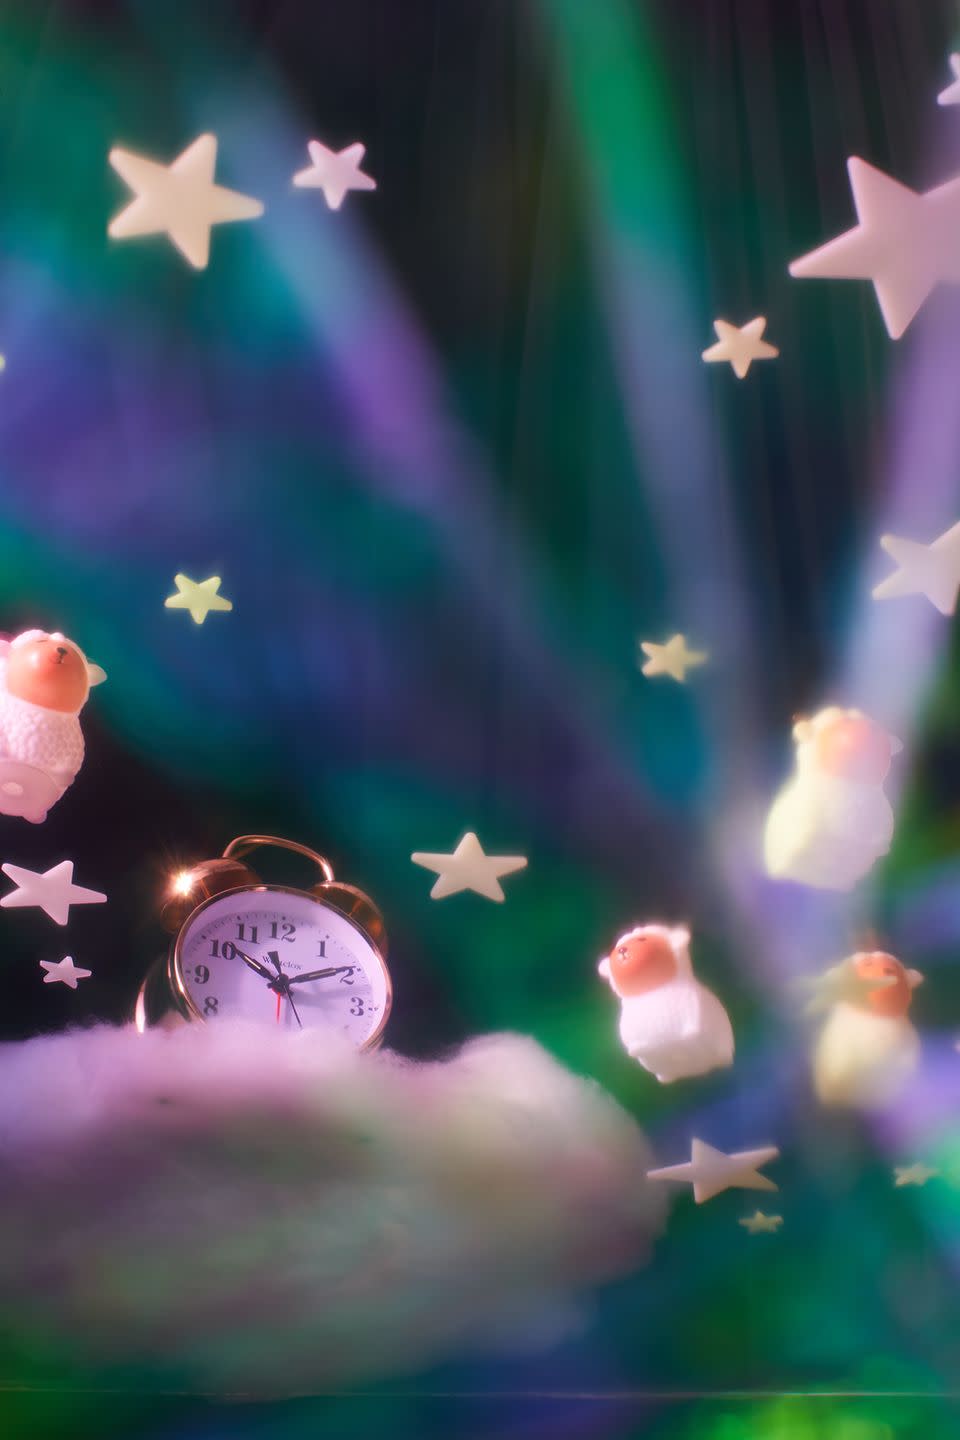 a clock cloud and plastic sheep in dreamy setting